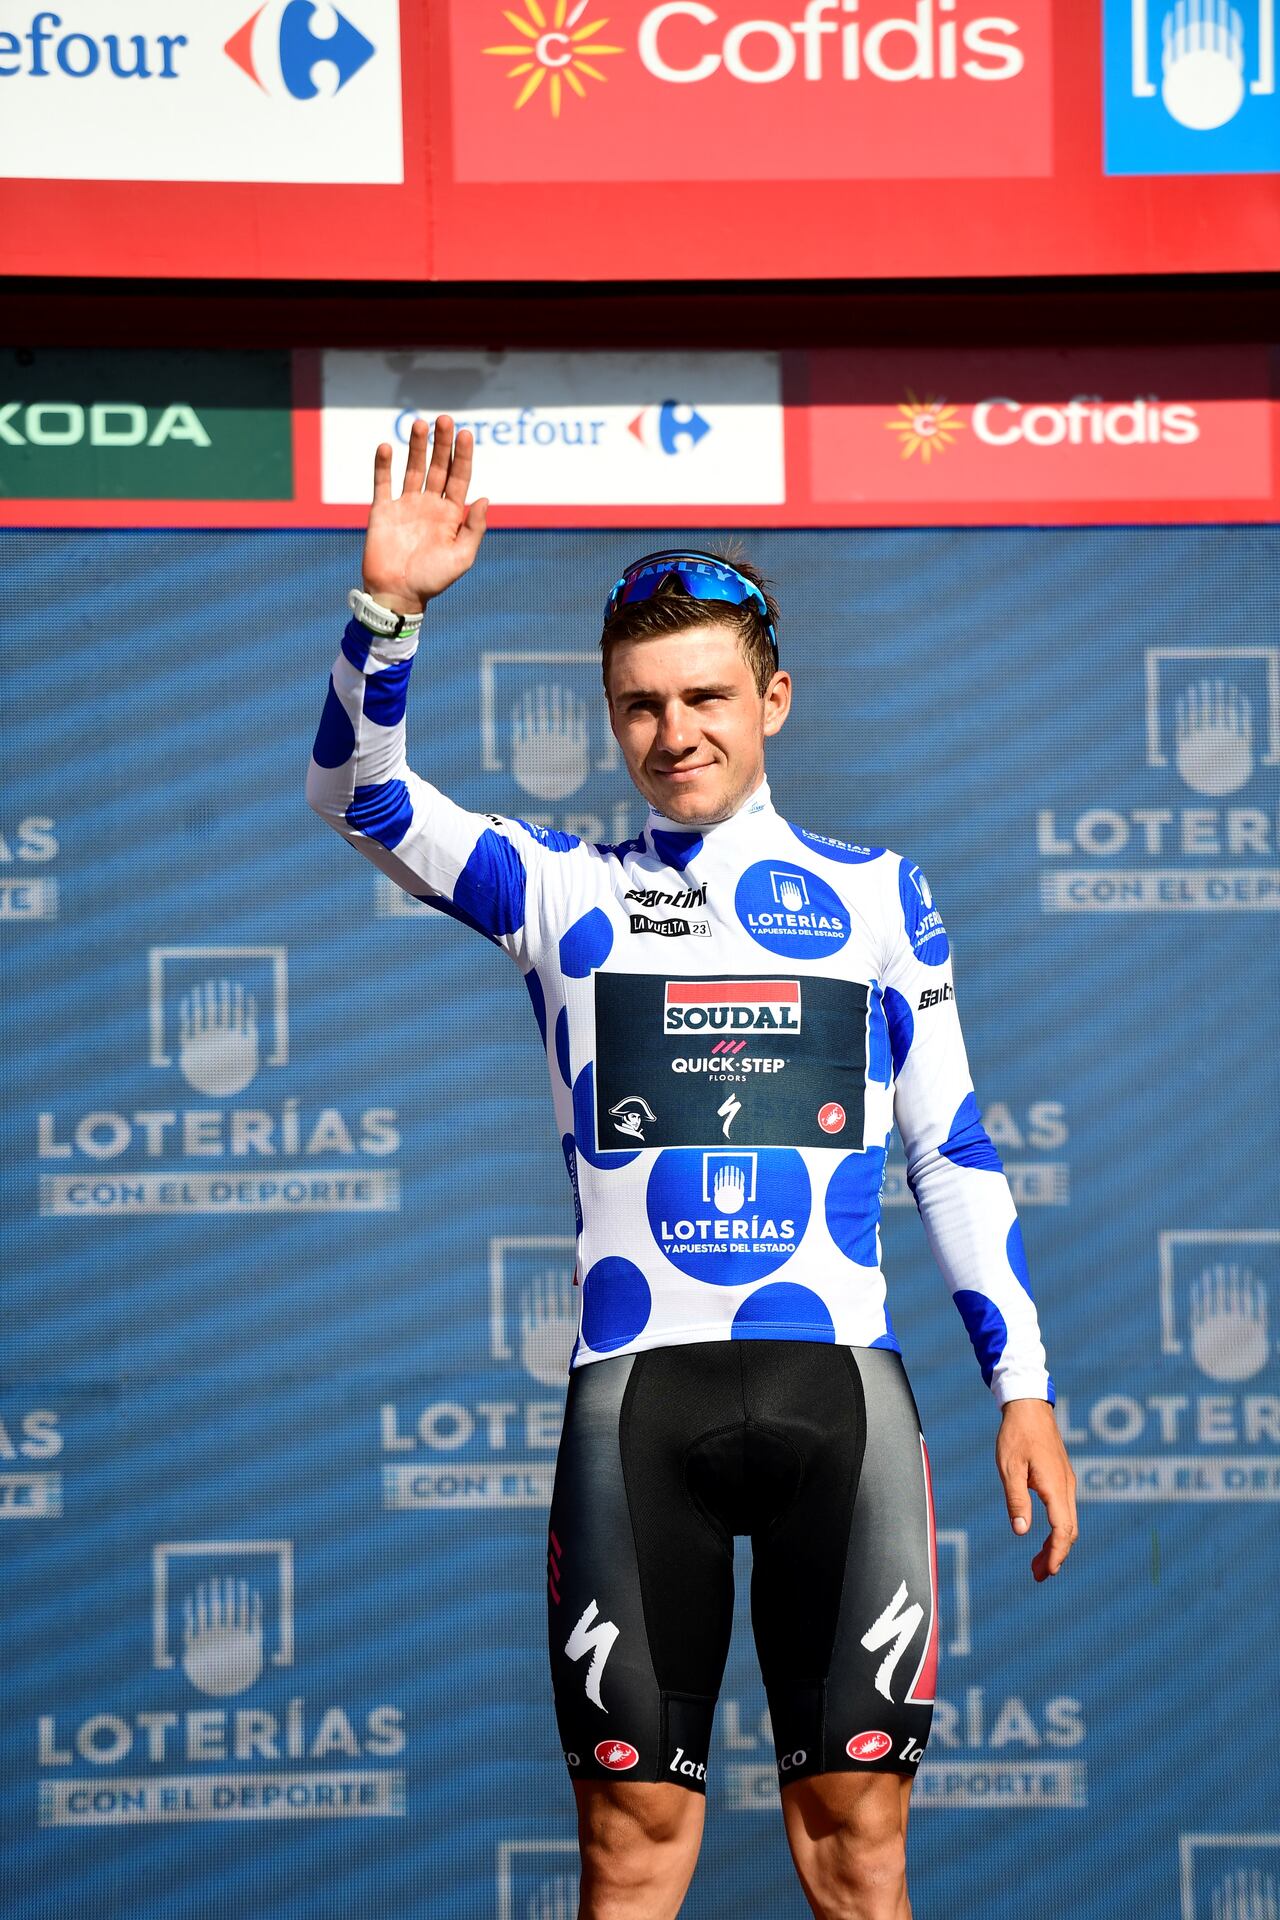 Team Quick Step's Belgian rider Remco Evenepoel celebrates on the podium wearing the best climber's dotted jersey after the stage 15 of the 2023 La Vuelta cycling tour of Spain, a 158,3 km race between Pamplona and Lekunberri on September 10, 2023. (Photo by ANDER GILLENEA / AFP)